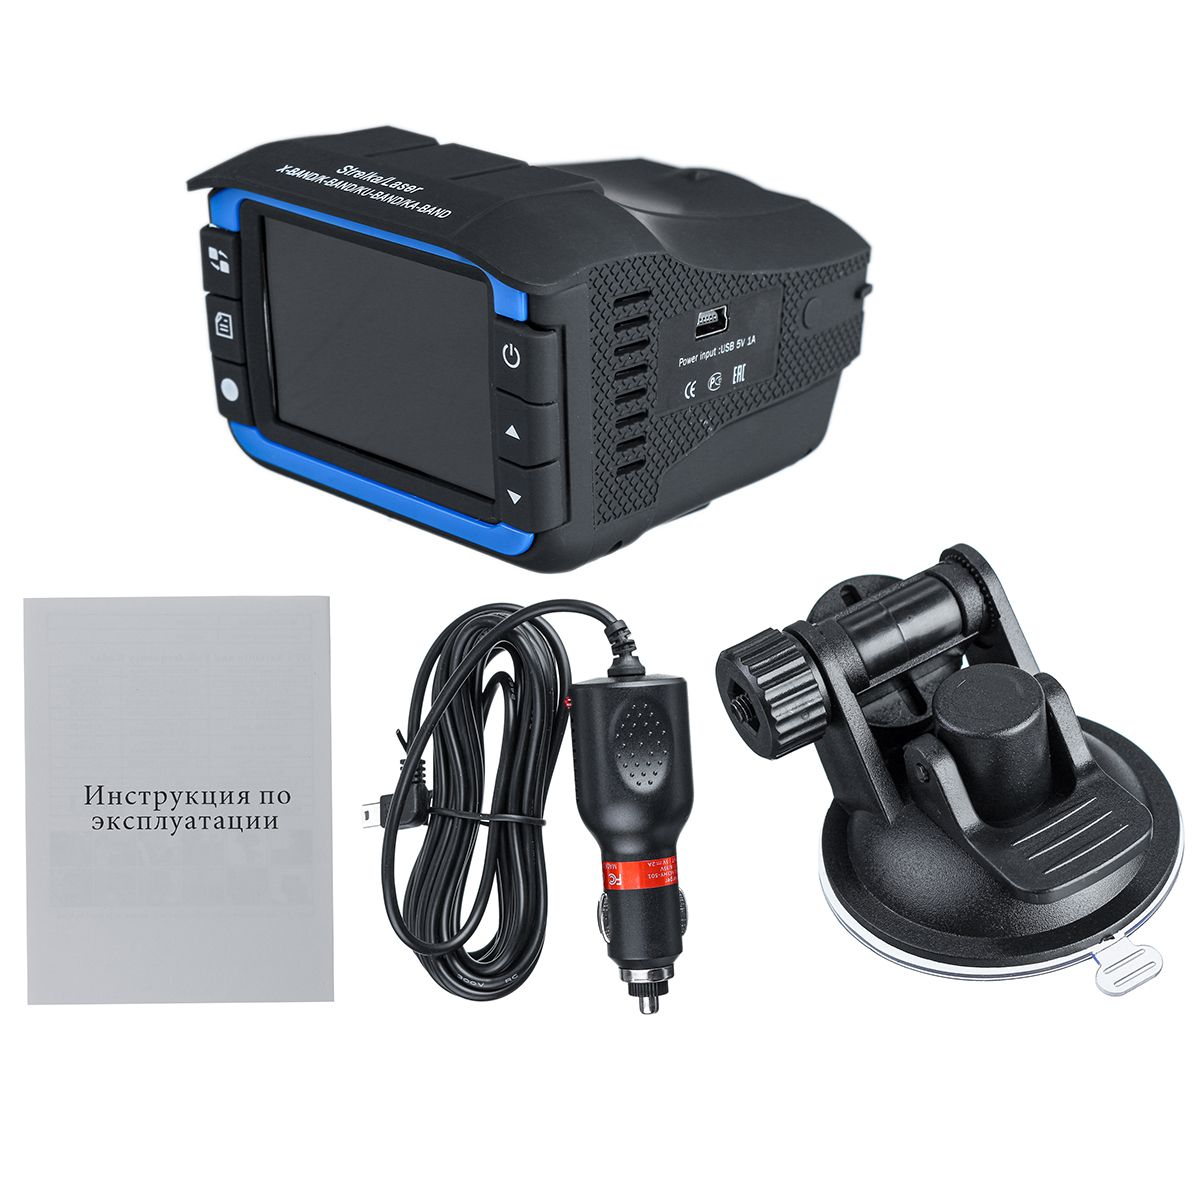 Car-DVR-Driving-Recorder-Mobile-Radar-2In-1-Detector-Dual-voice-Broadcast-Early-Warning-Instrument-1705457